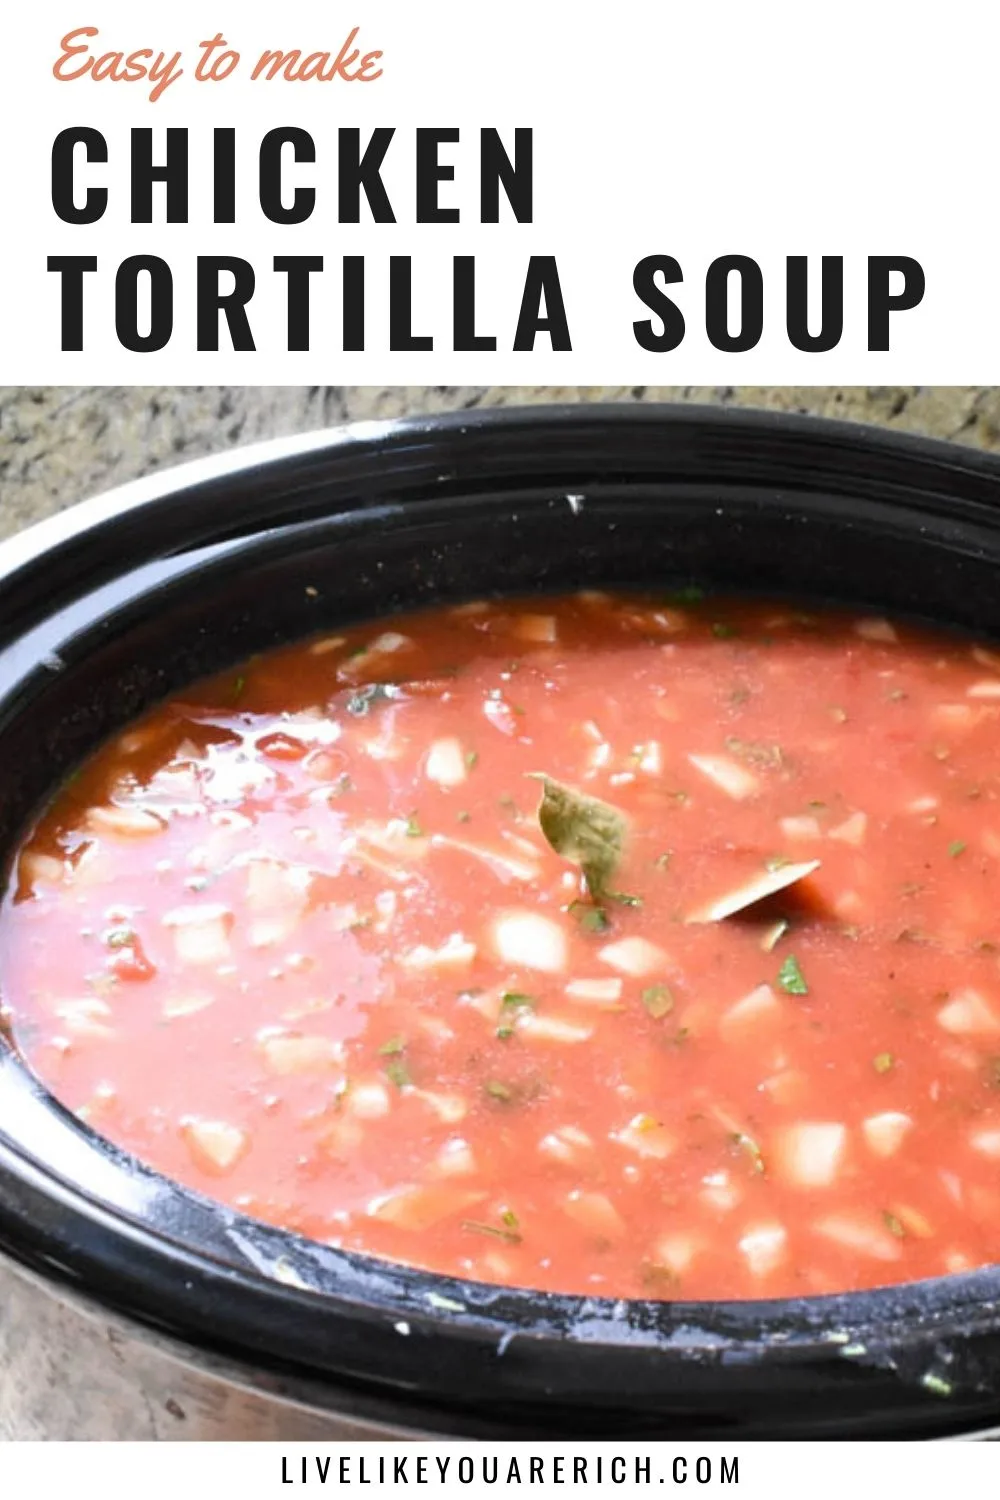 This is an amazing recipe for Slow Cooker Chicken Tortilla Soup. Not only is it an easy meal to prepare (10 or so minutes), it is so tasty, versatile, and healthy. Because families have varying spice tolerance, I've included instructions for the Mild, Medium, and Hot versions. #chickentortillasoup #slowcookerrecipe